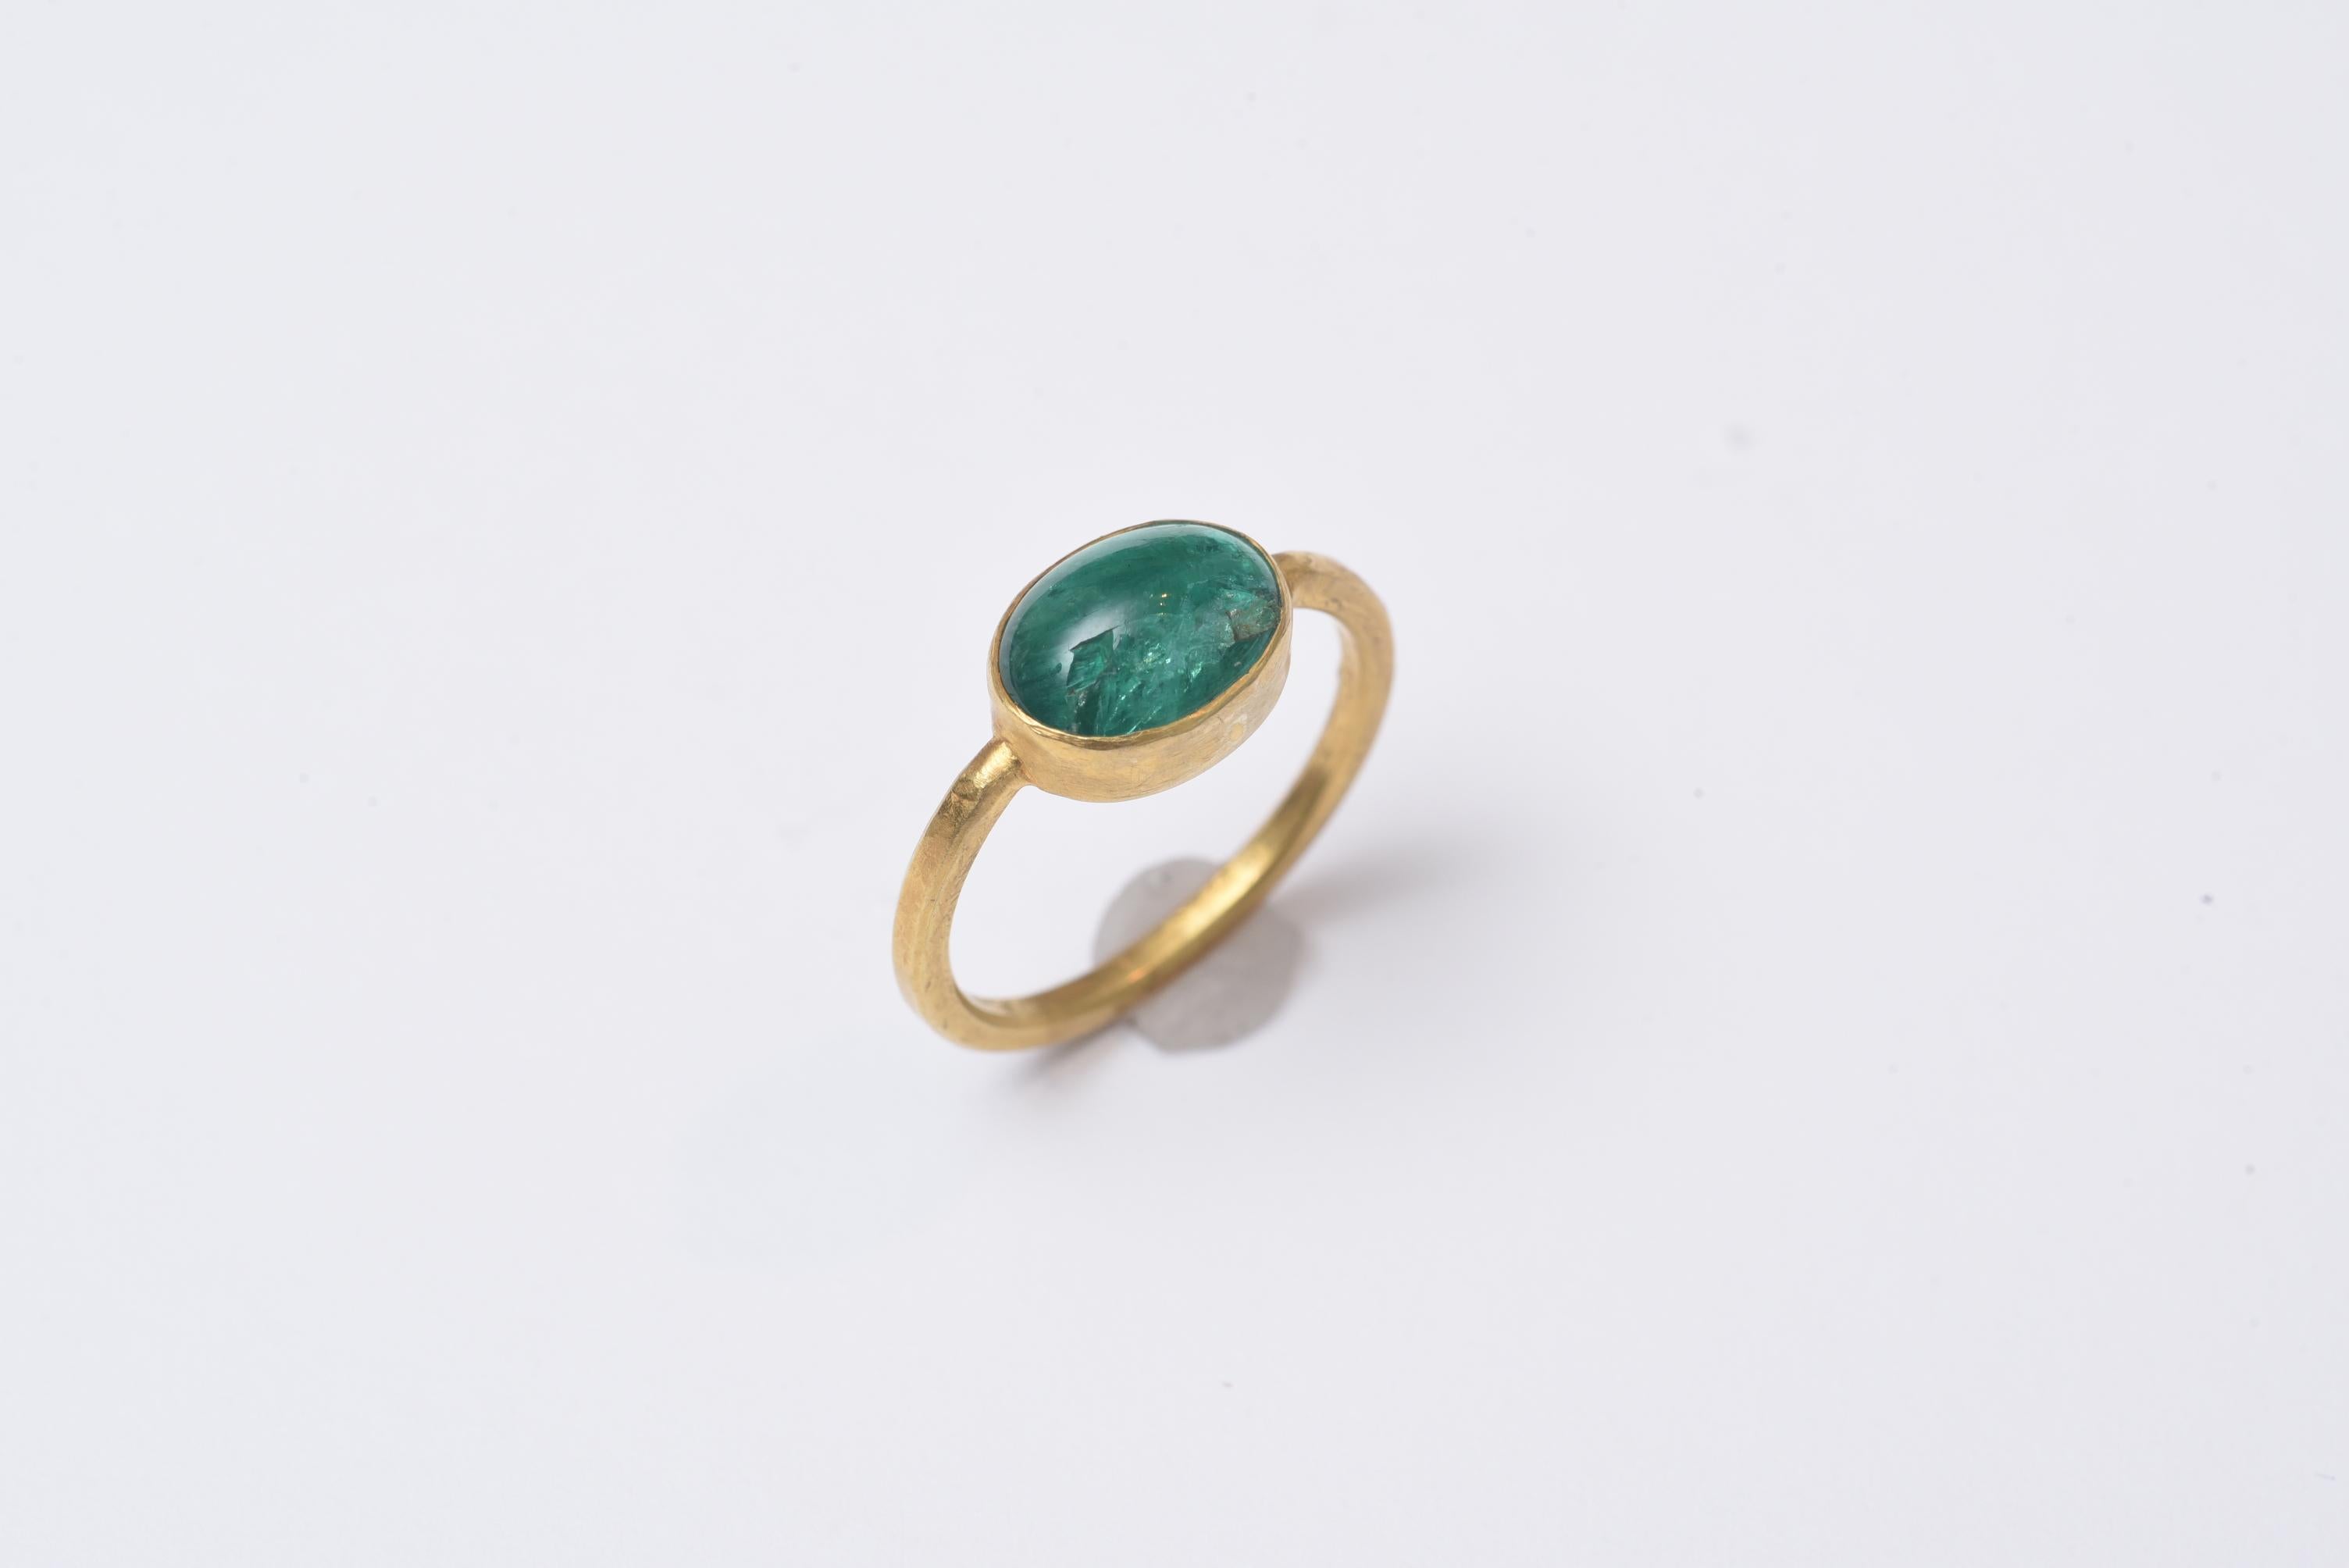 Cabochon emerald solitaire ring set in a nicely simple 22K gold band.  Ring size is 6.75.  Mid-1900's.